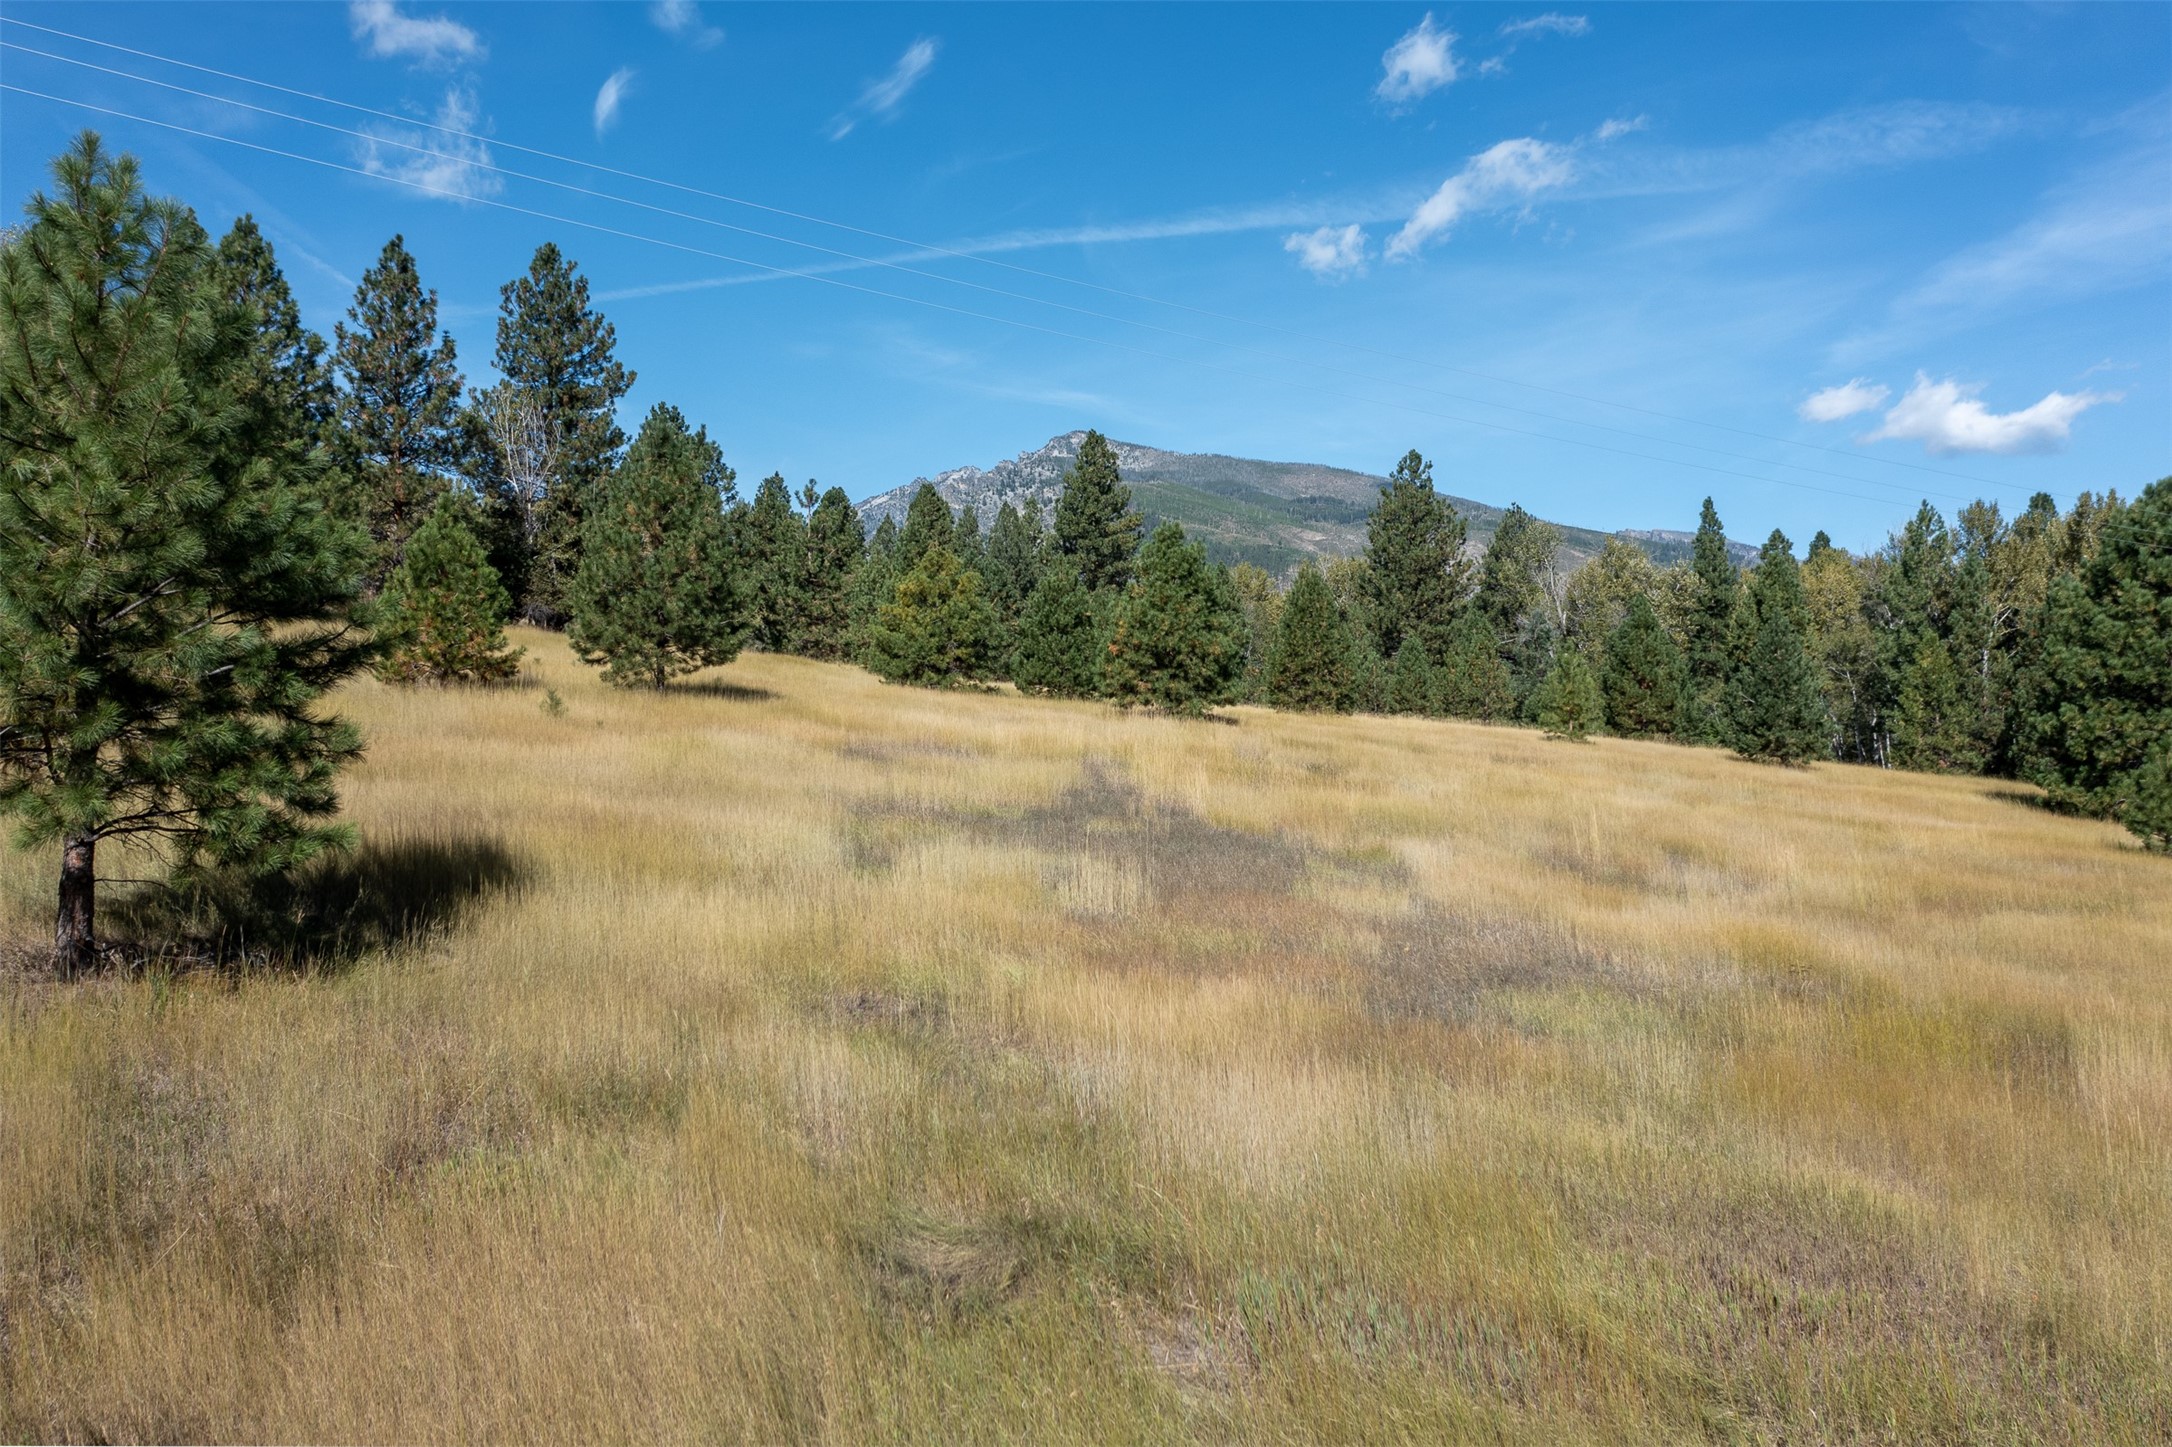 One of a kind property, stunning views, varied property with trees, meadow, and close to town. You will have many choices where to build and beautiful variety of trees.  Electricity available. There is an irrigation ditch through the property.